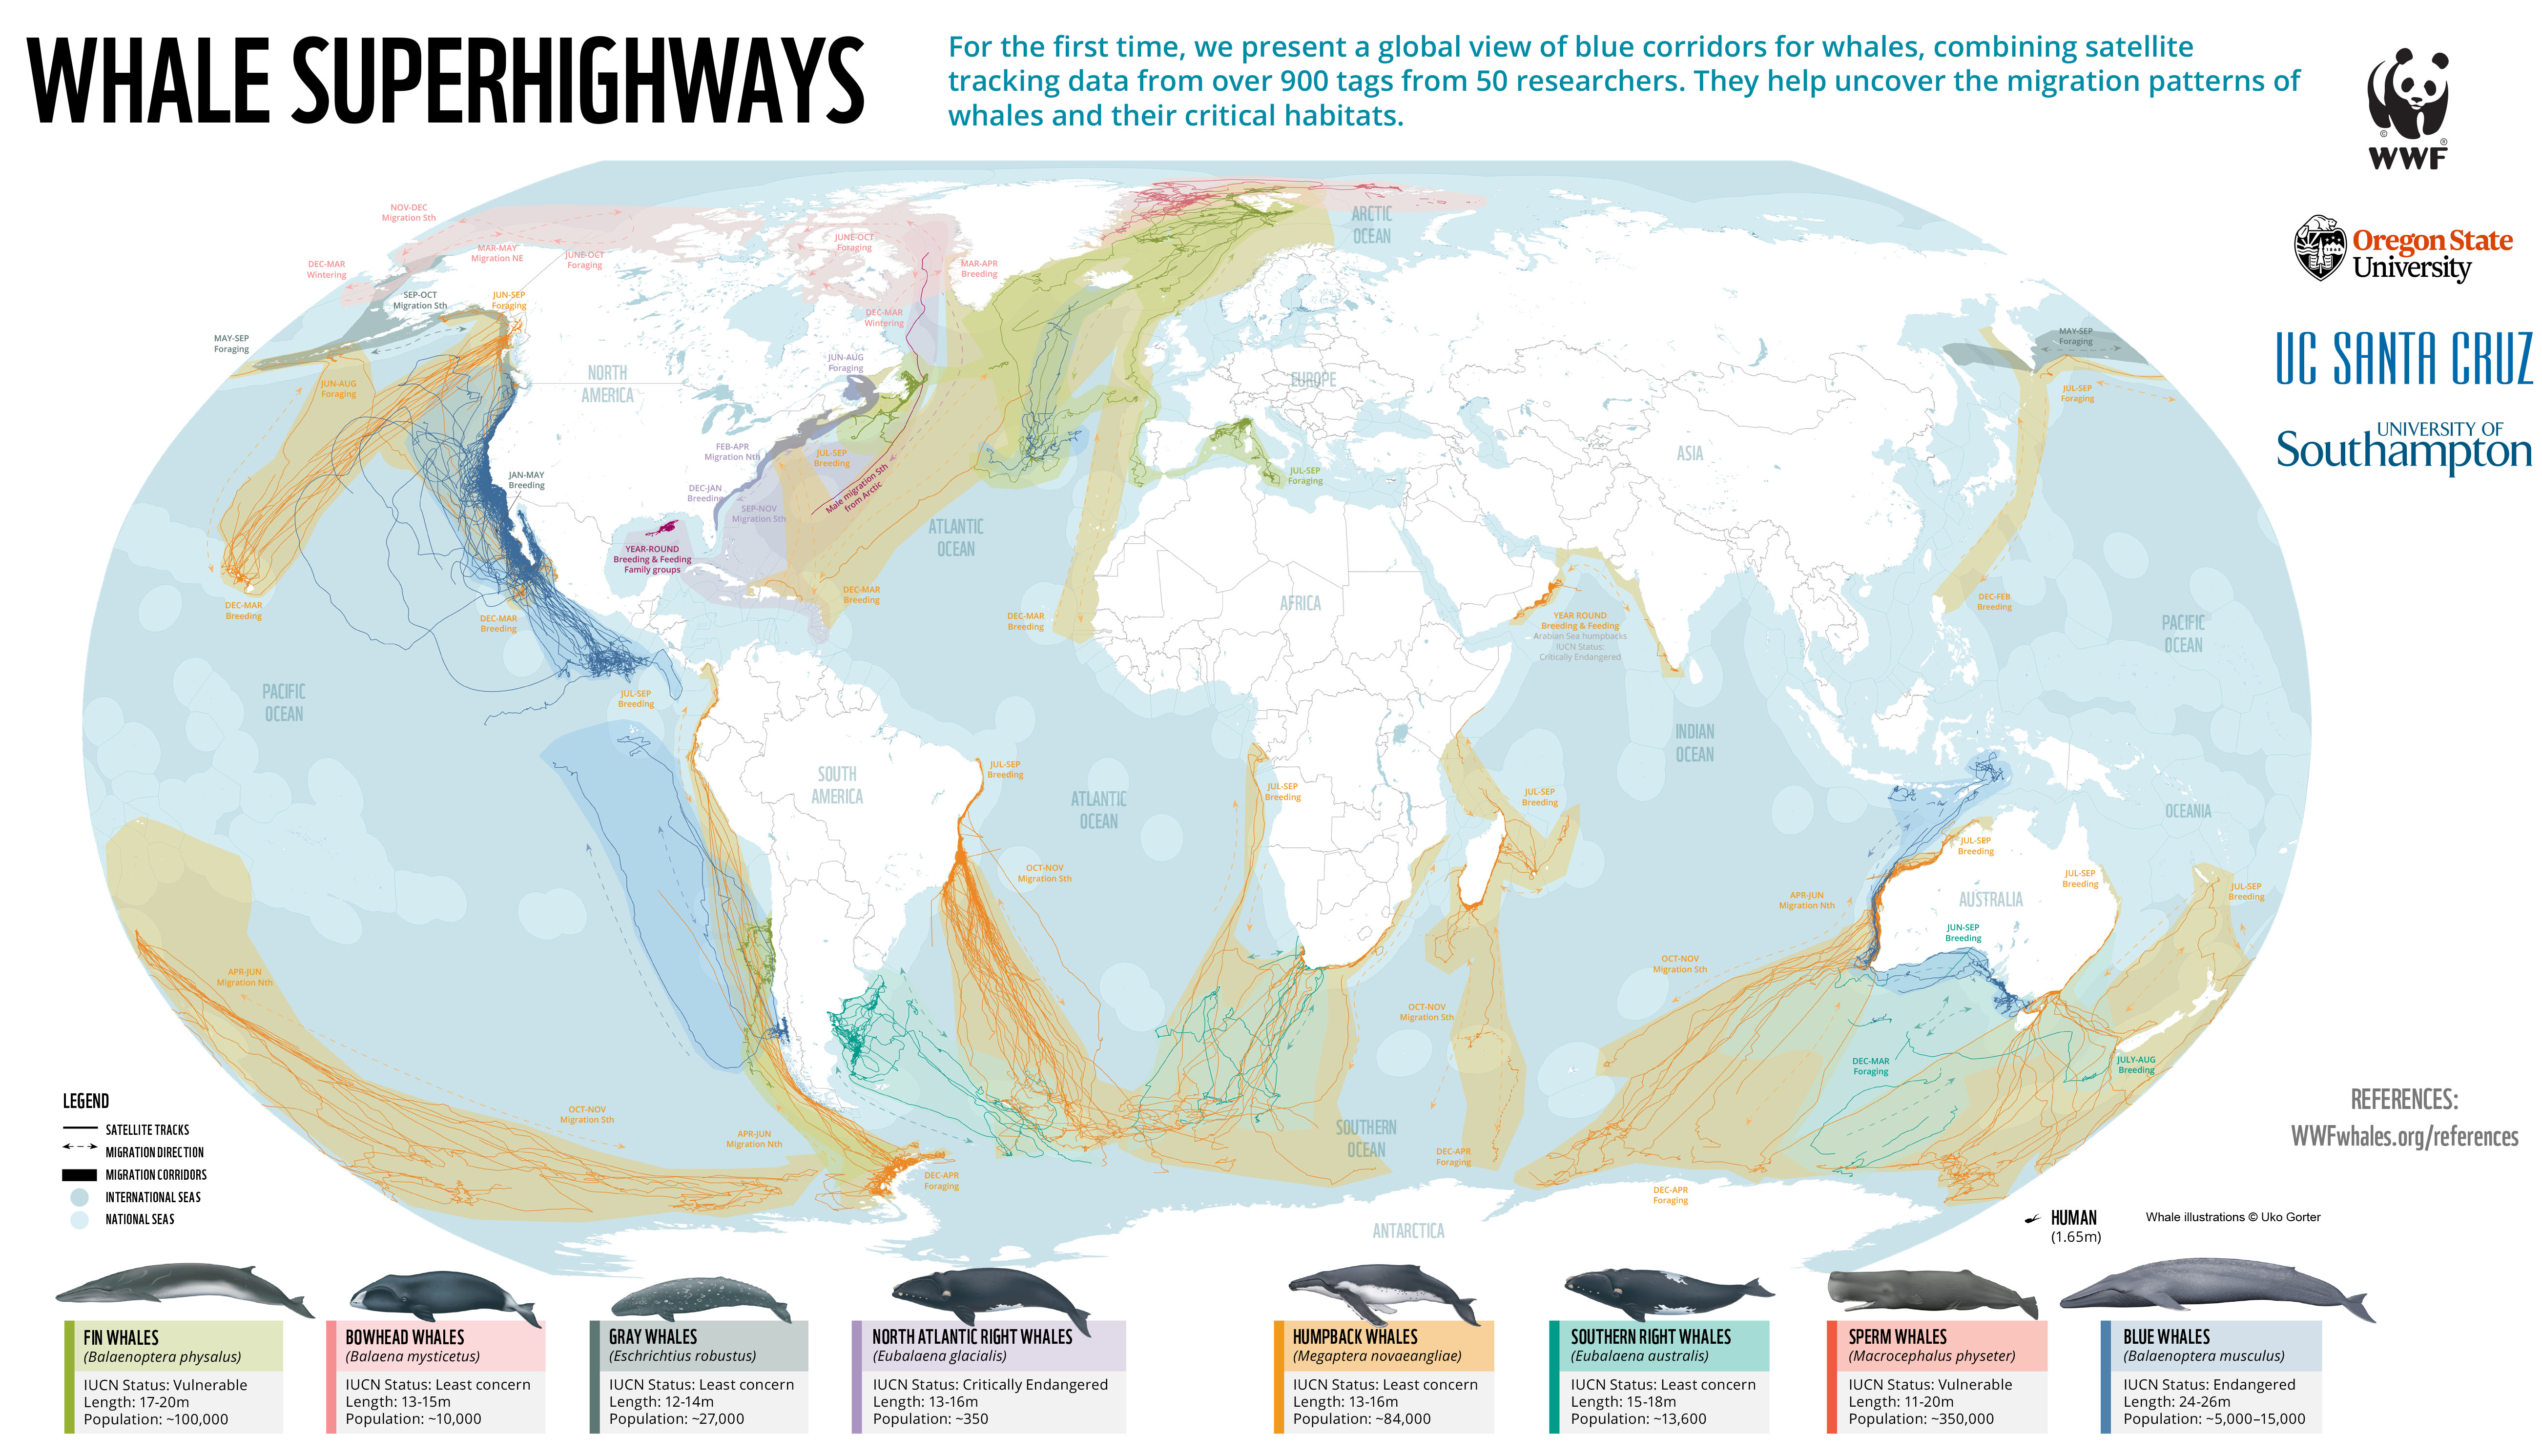 Whale 'superhighways' mapped in the report (WWF/PA)